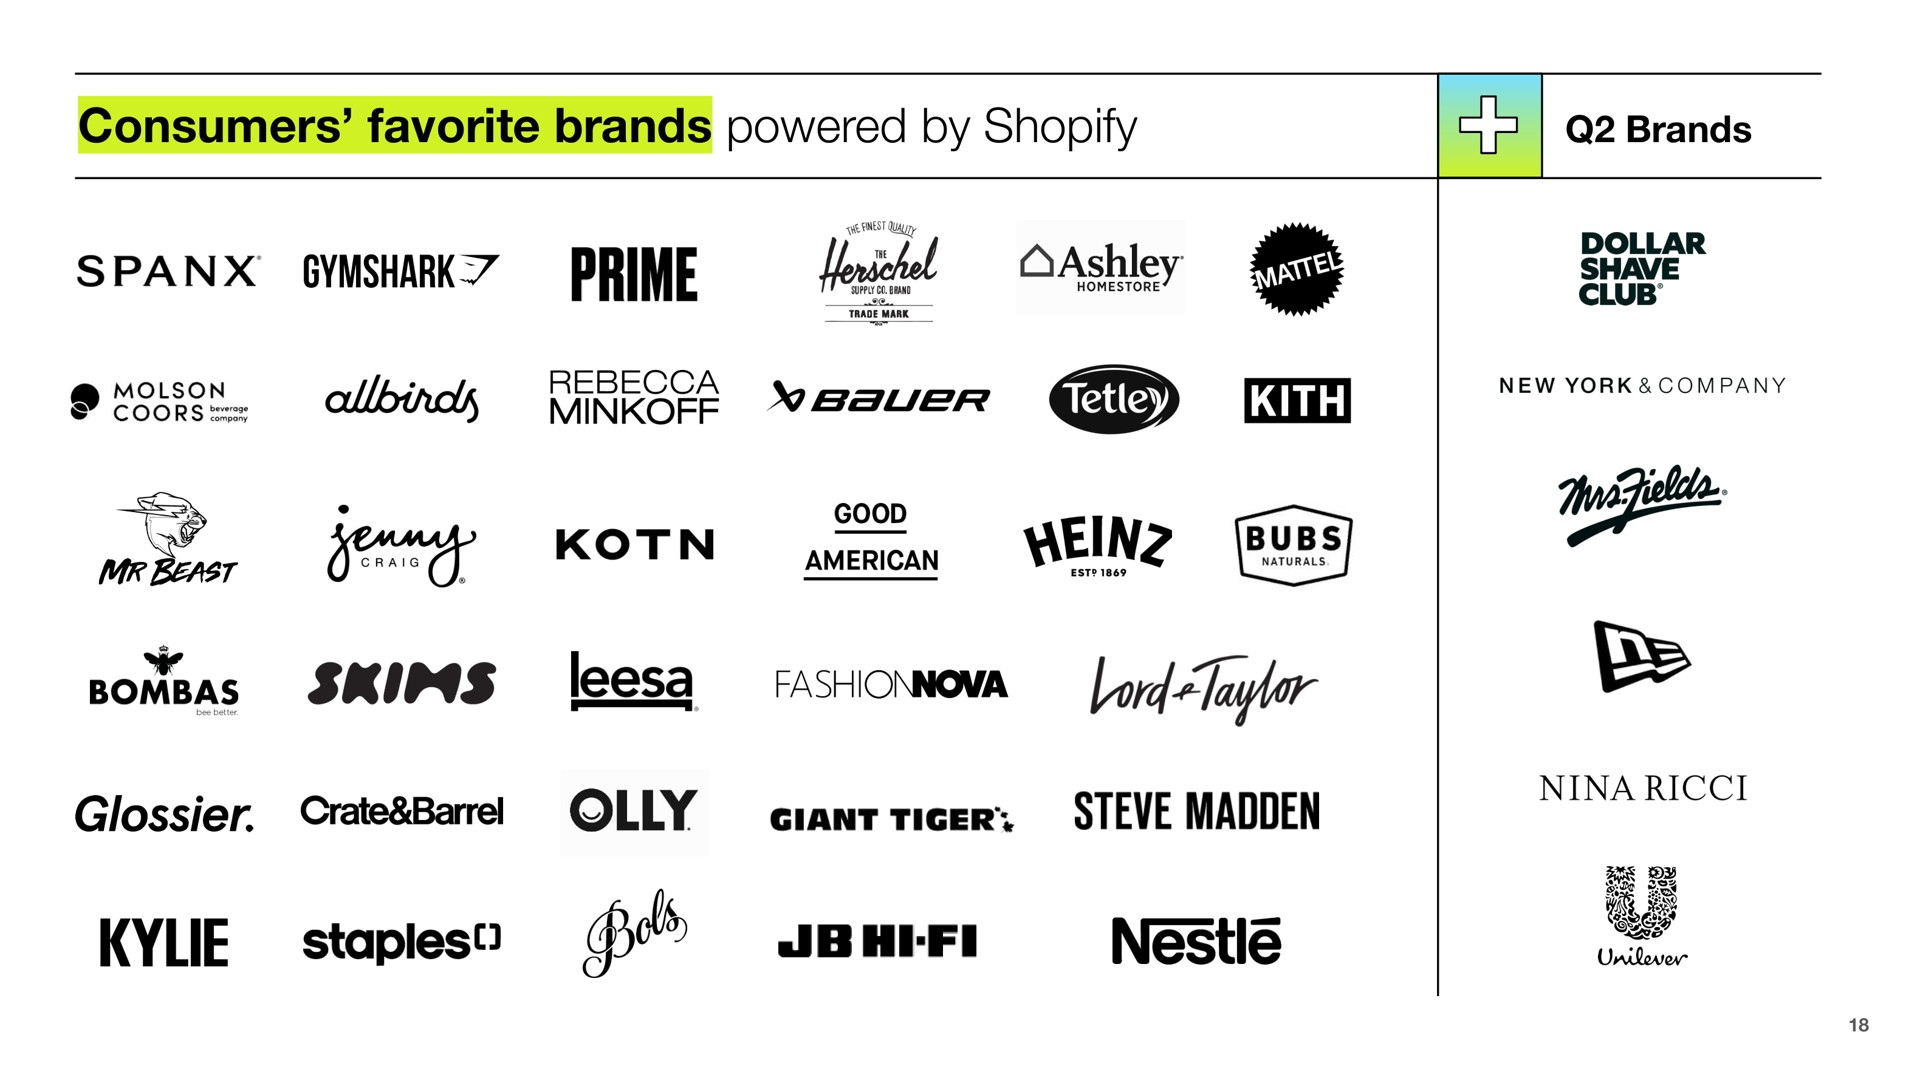 consumers favorite brands powered by prime dollar shave kith settee crate barrel ticer madden staples go nestle | Shopify